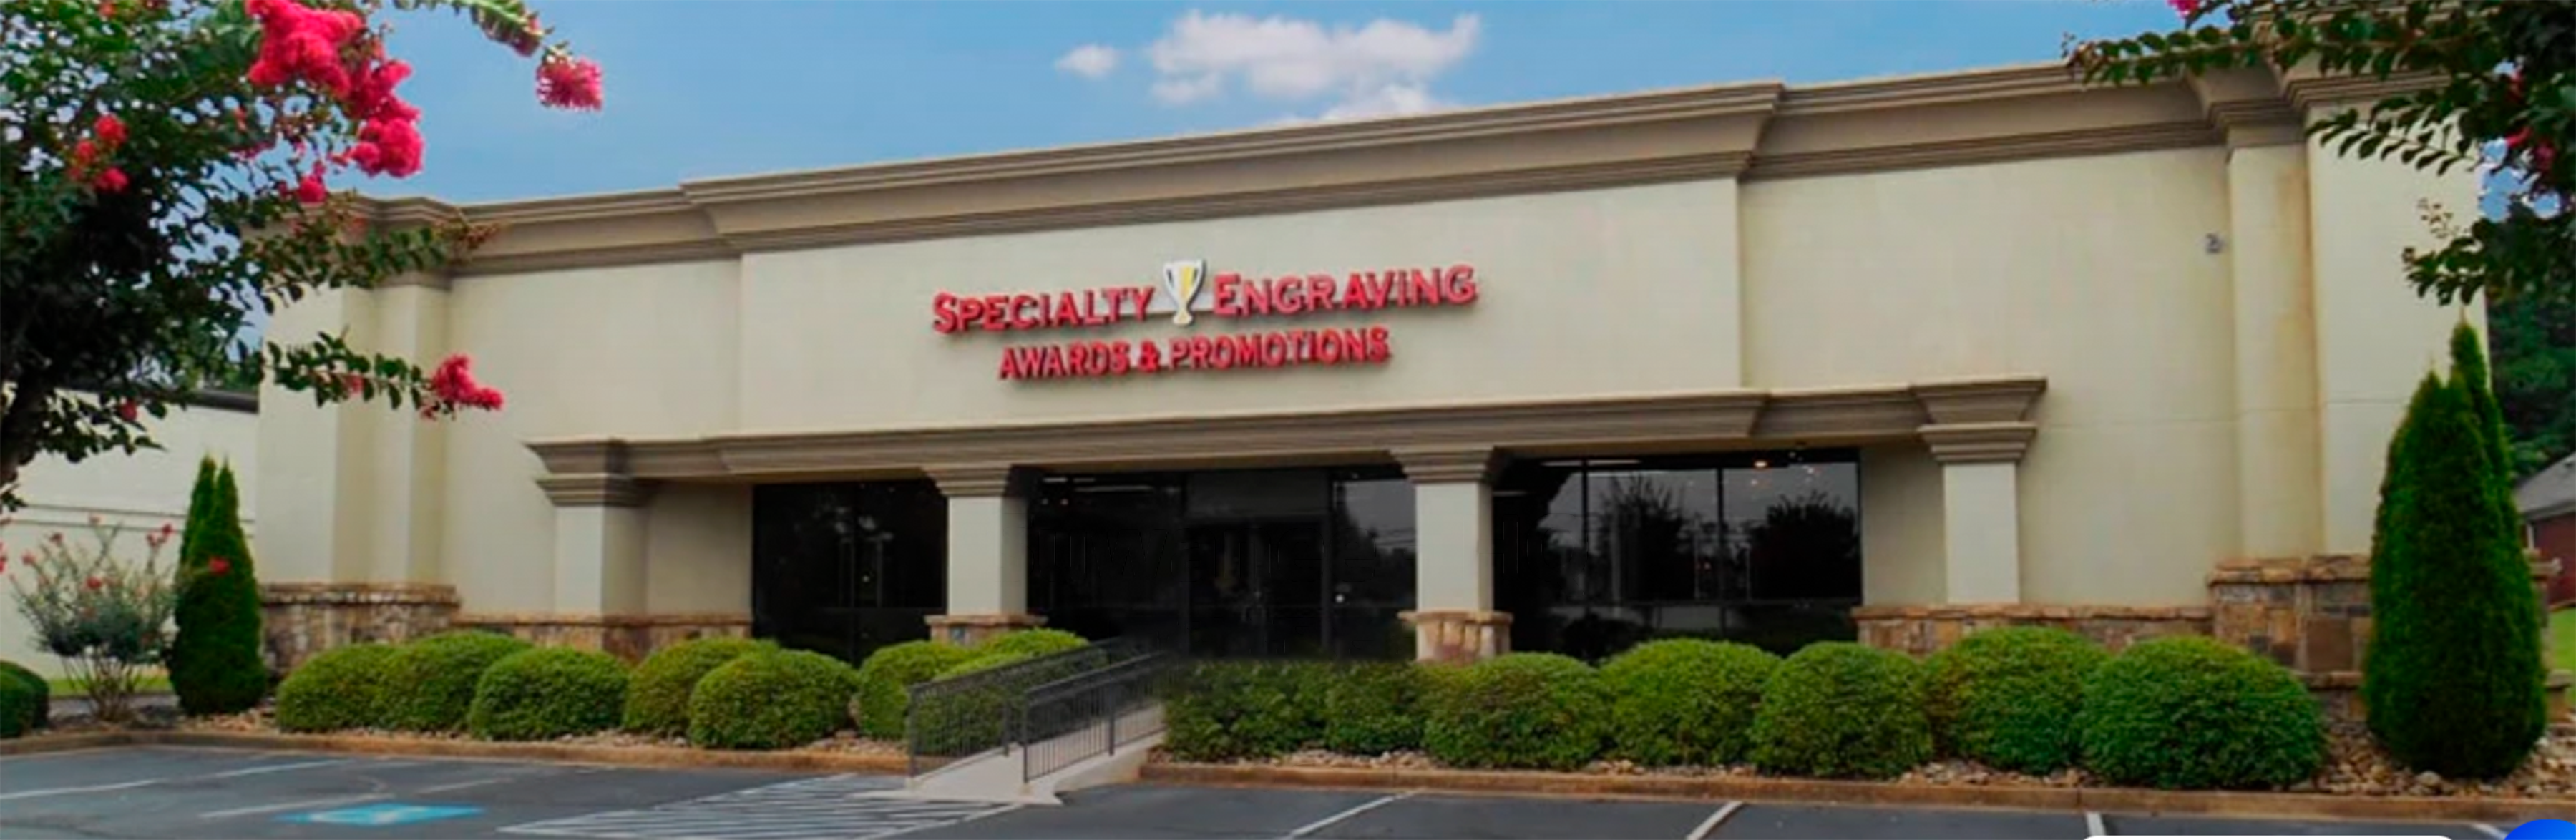 Atlanta's Specialty Engraving, still leading with Service, Quality and Innovation since 1958